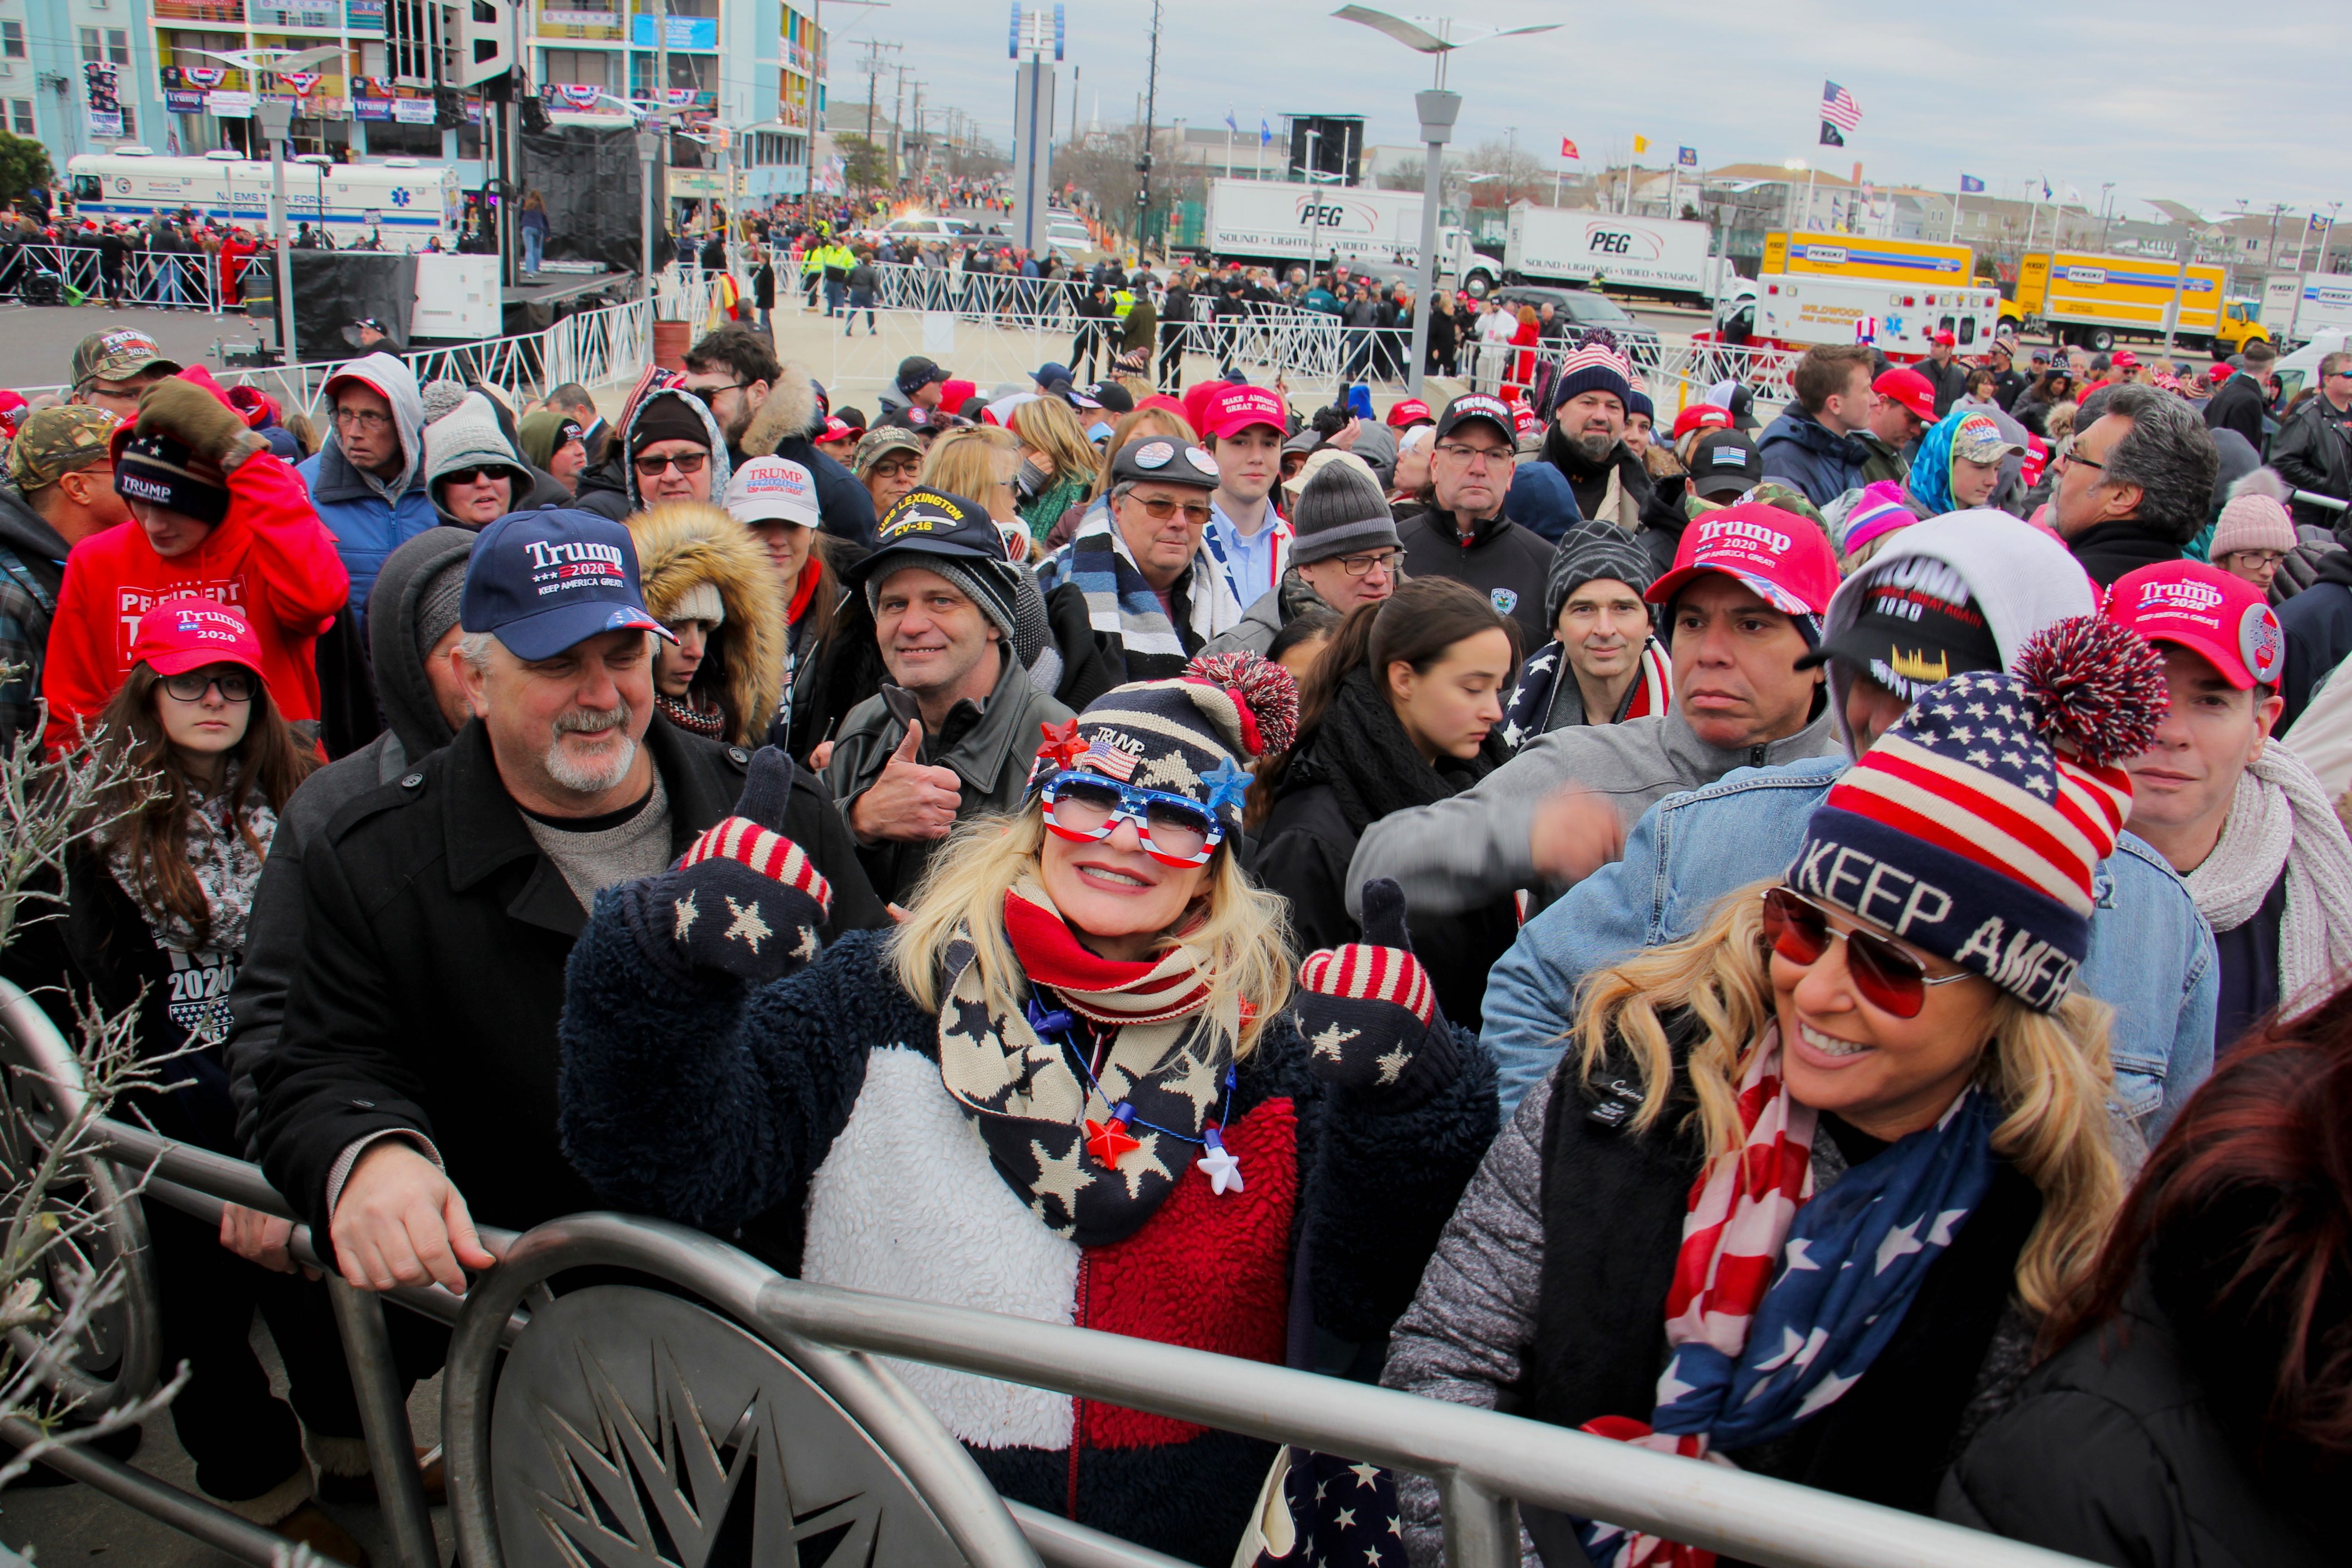 Trump’s rally in Wildwood draws tens of thousands WHYY